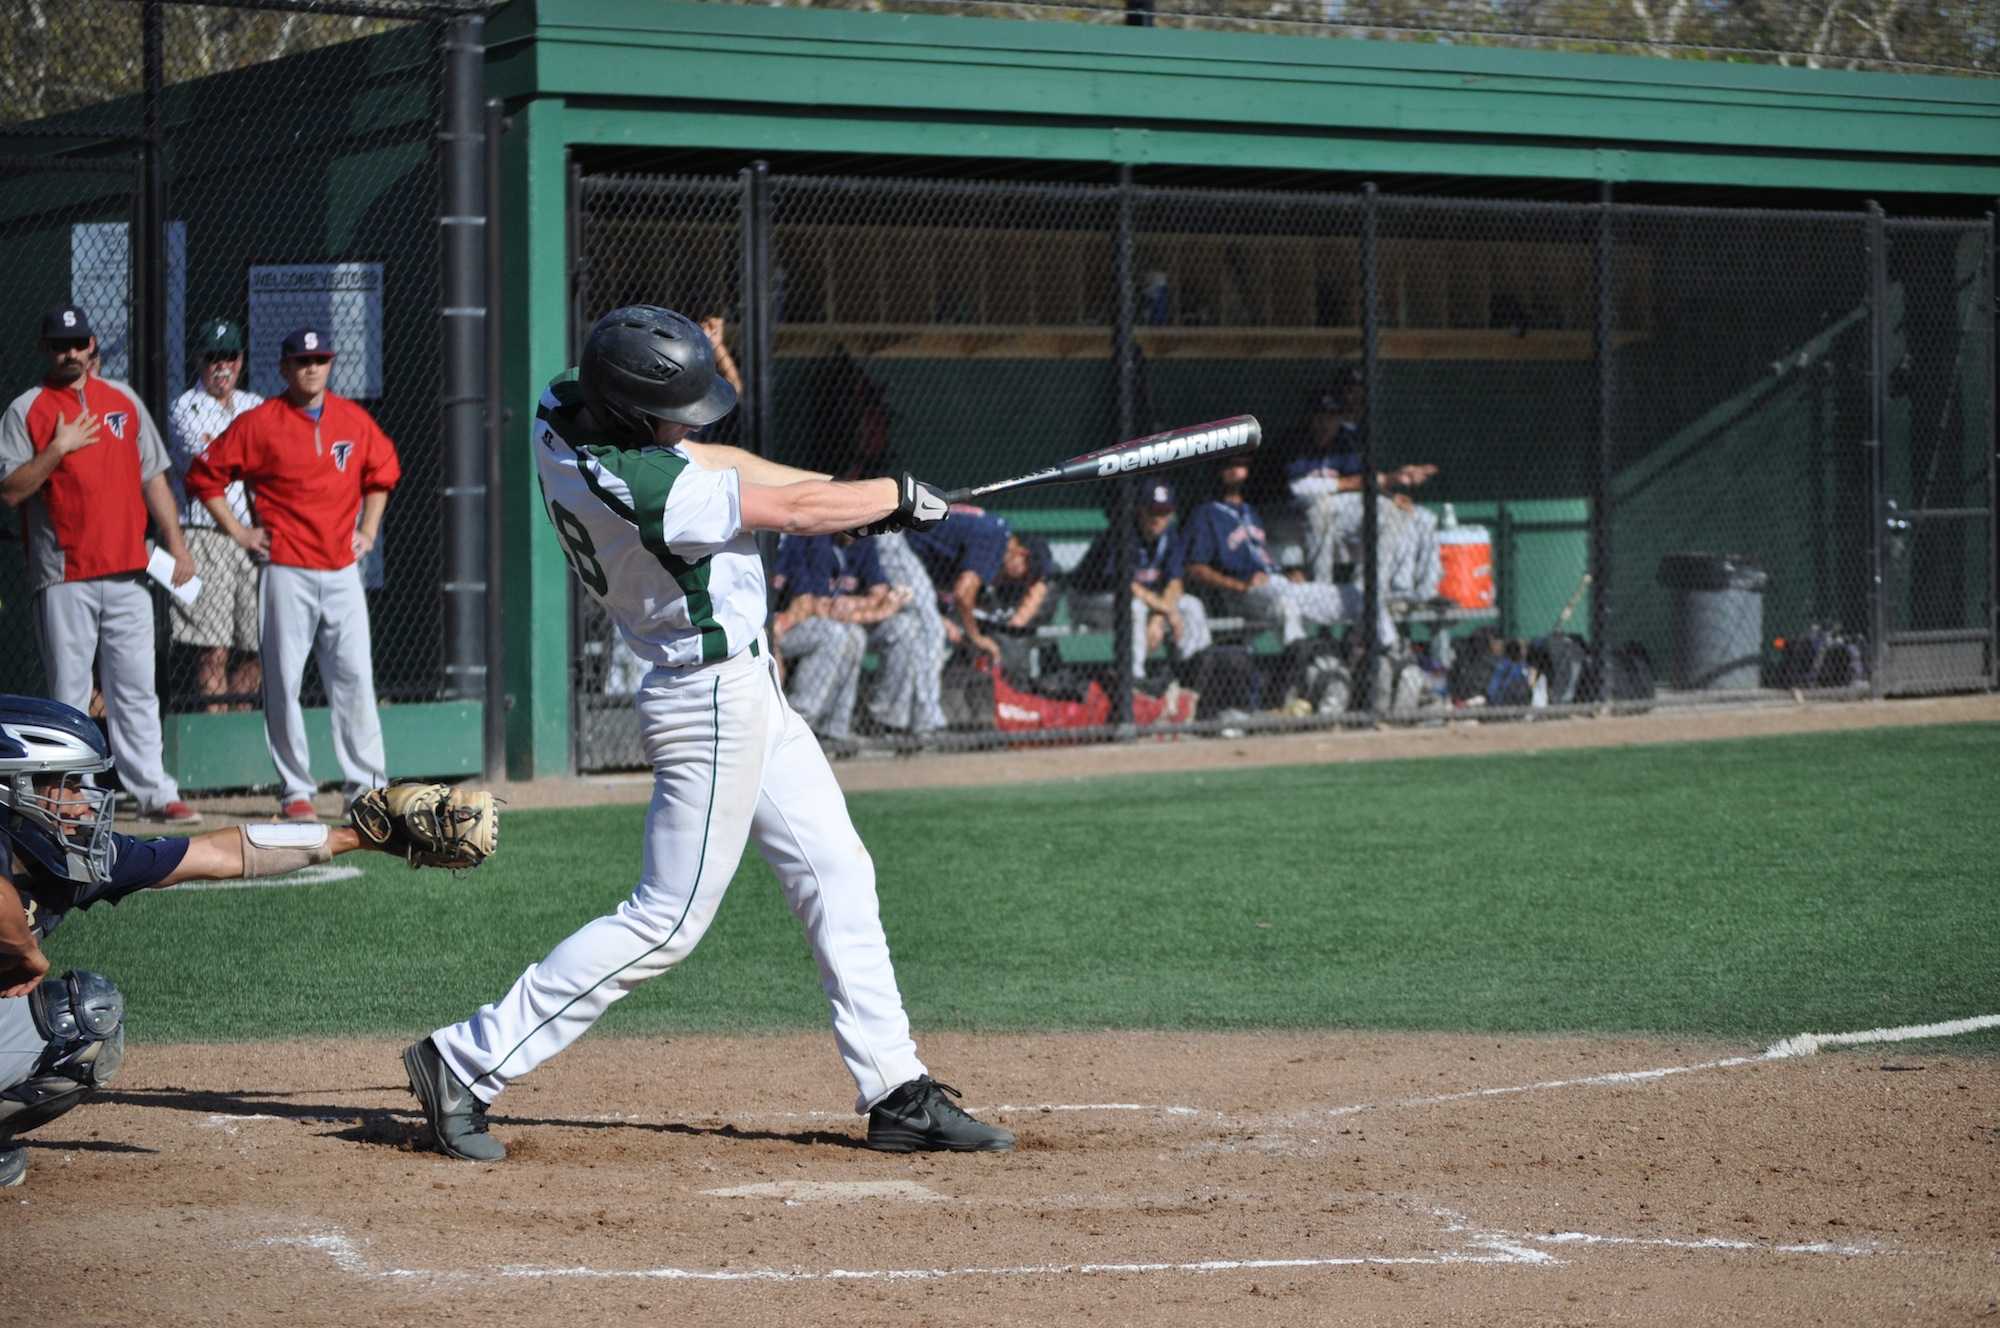 Bowen+Gerould+%2814%29+hacks+at+a+fastball+in+his+first+at+bat.+Gerould+had+2+hits+against+Saratoga.